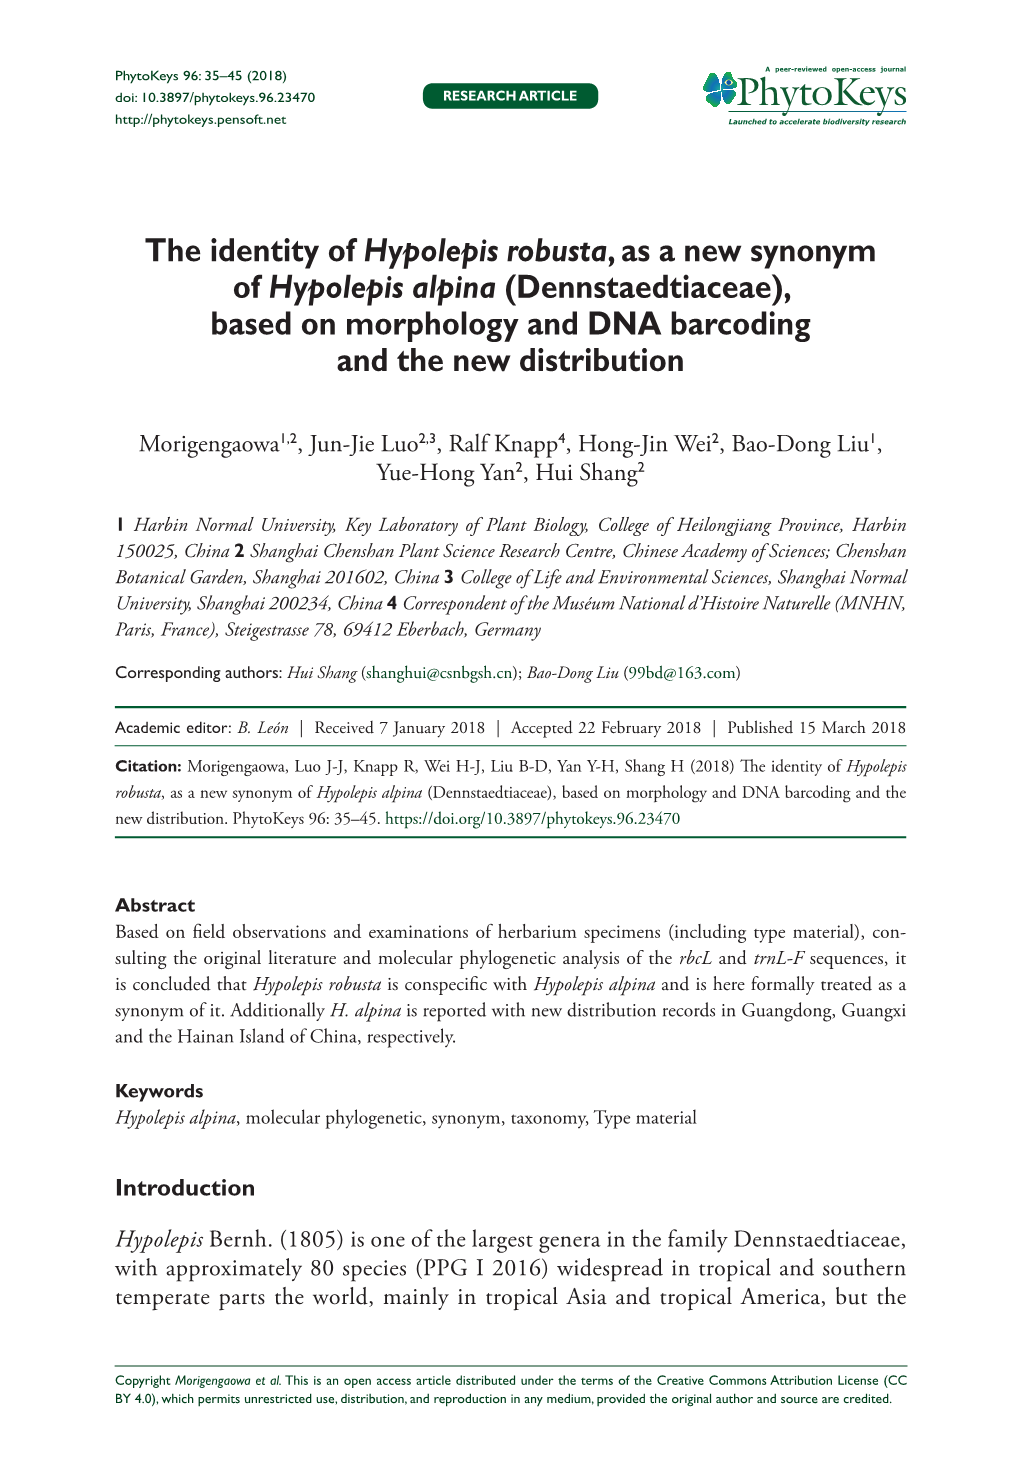 ﻿The Identity of Hypolepis Robusta, As a New Synonym of Hypolepis Alpina